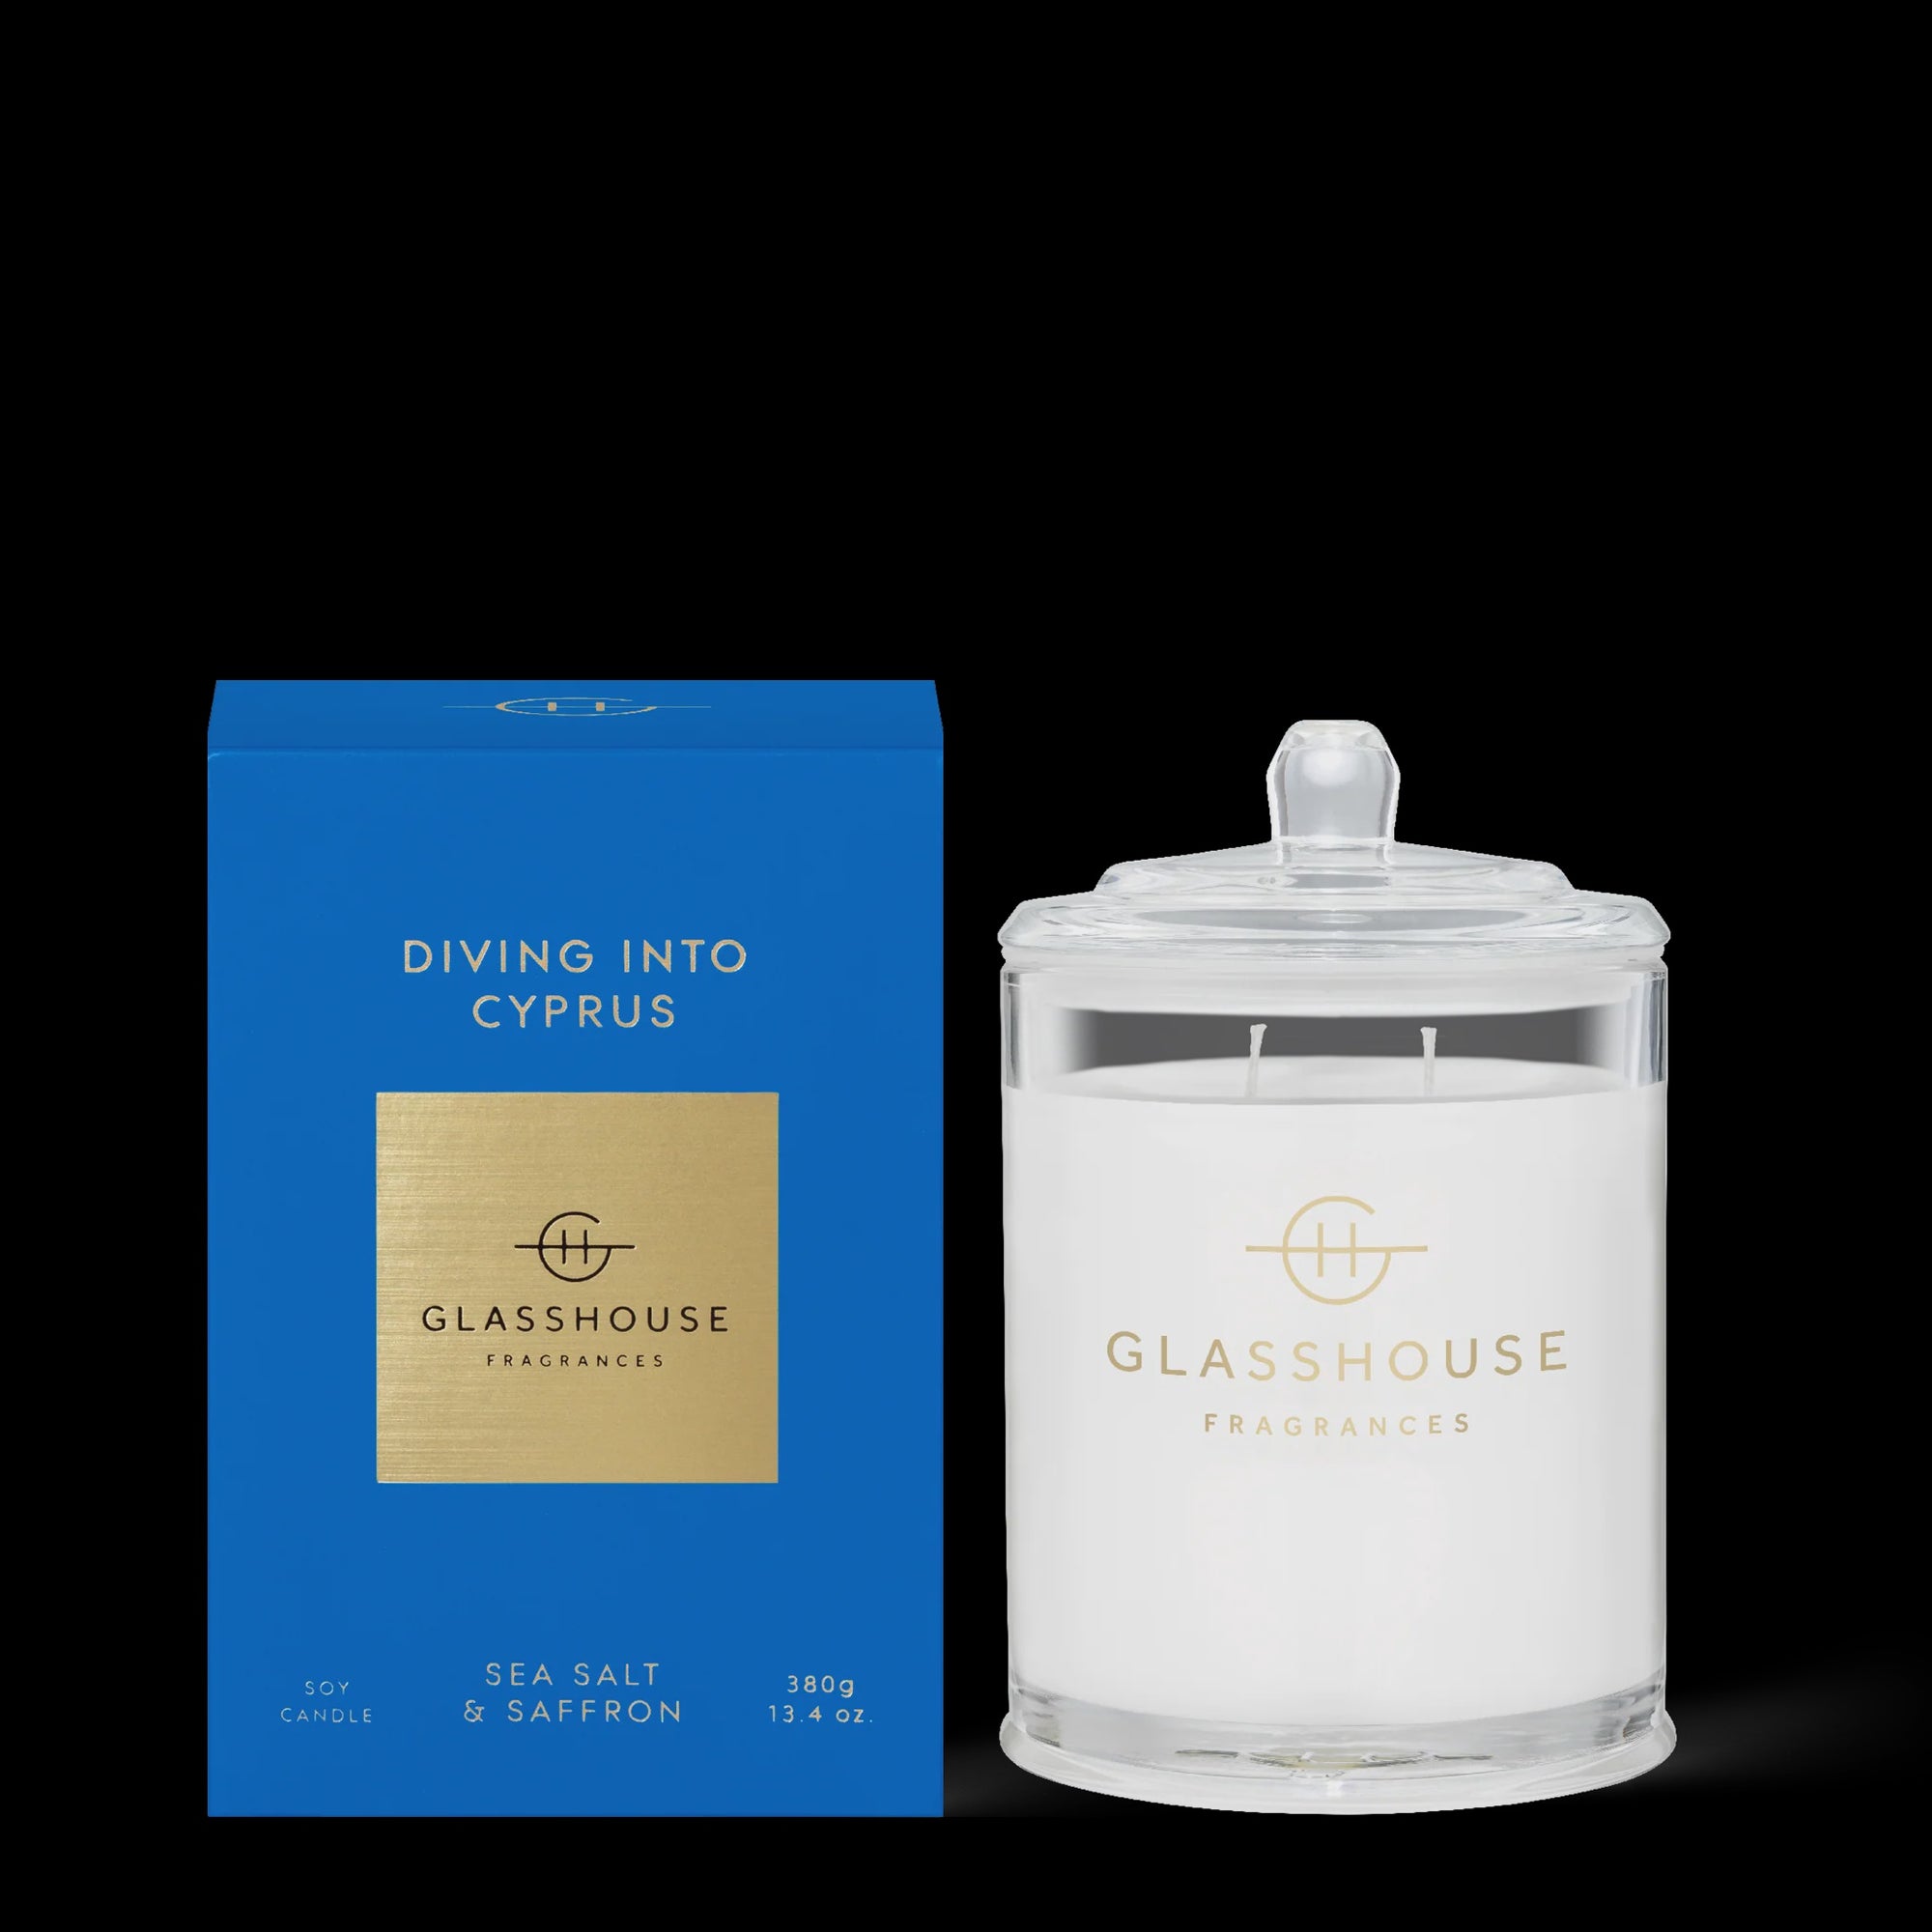 Glasshouse Fragrances Diving into Cyprus Candle 380g